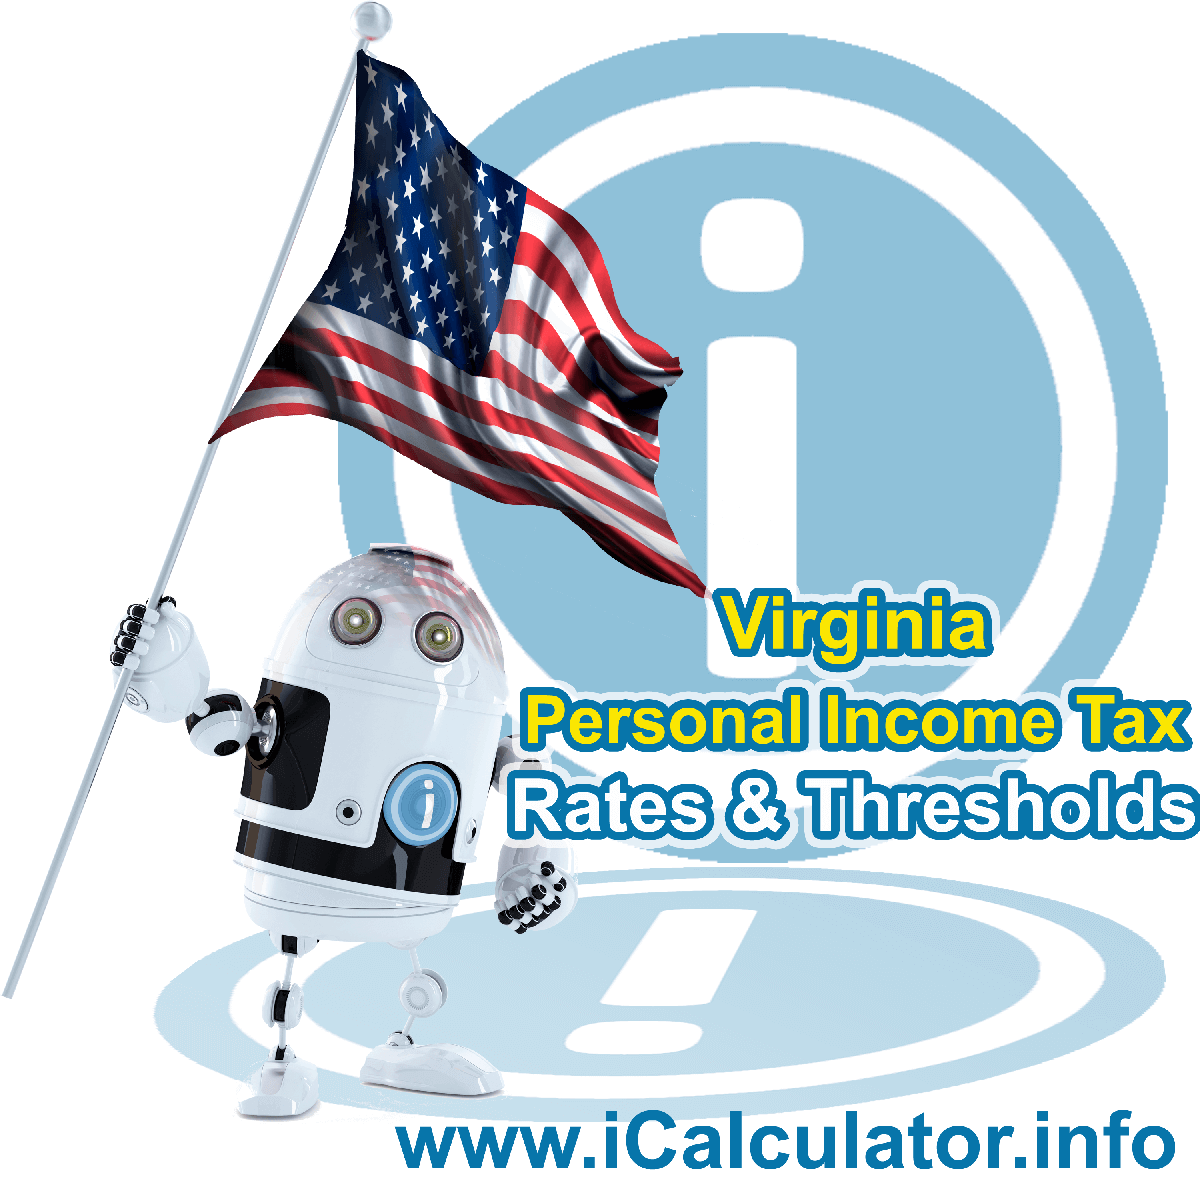 Virginia State Tax Tables 2013. This image displays details of the Virginia State Tax Tables for the 2013 tax return year which is provided in support of the 2013 US Tax Calculator